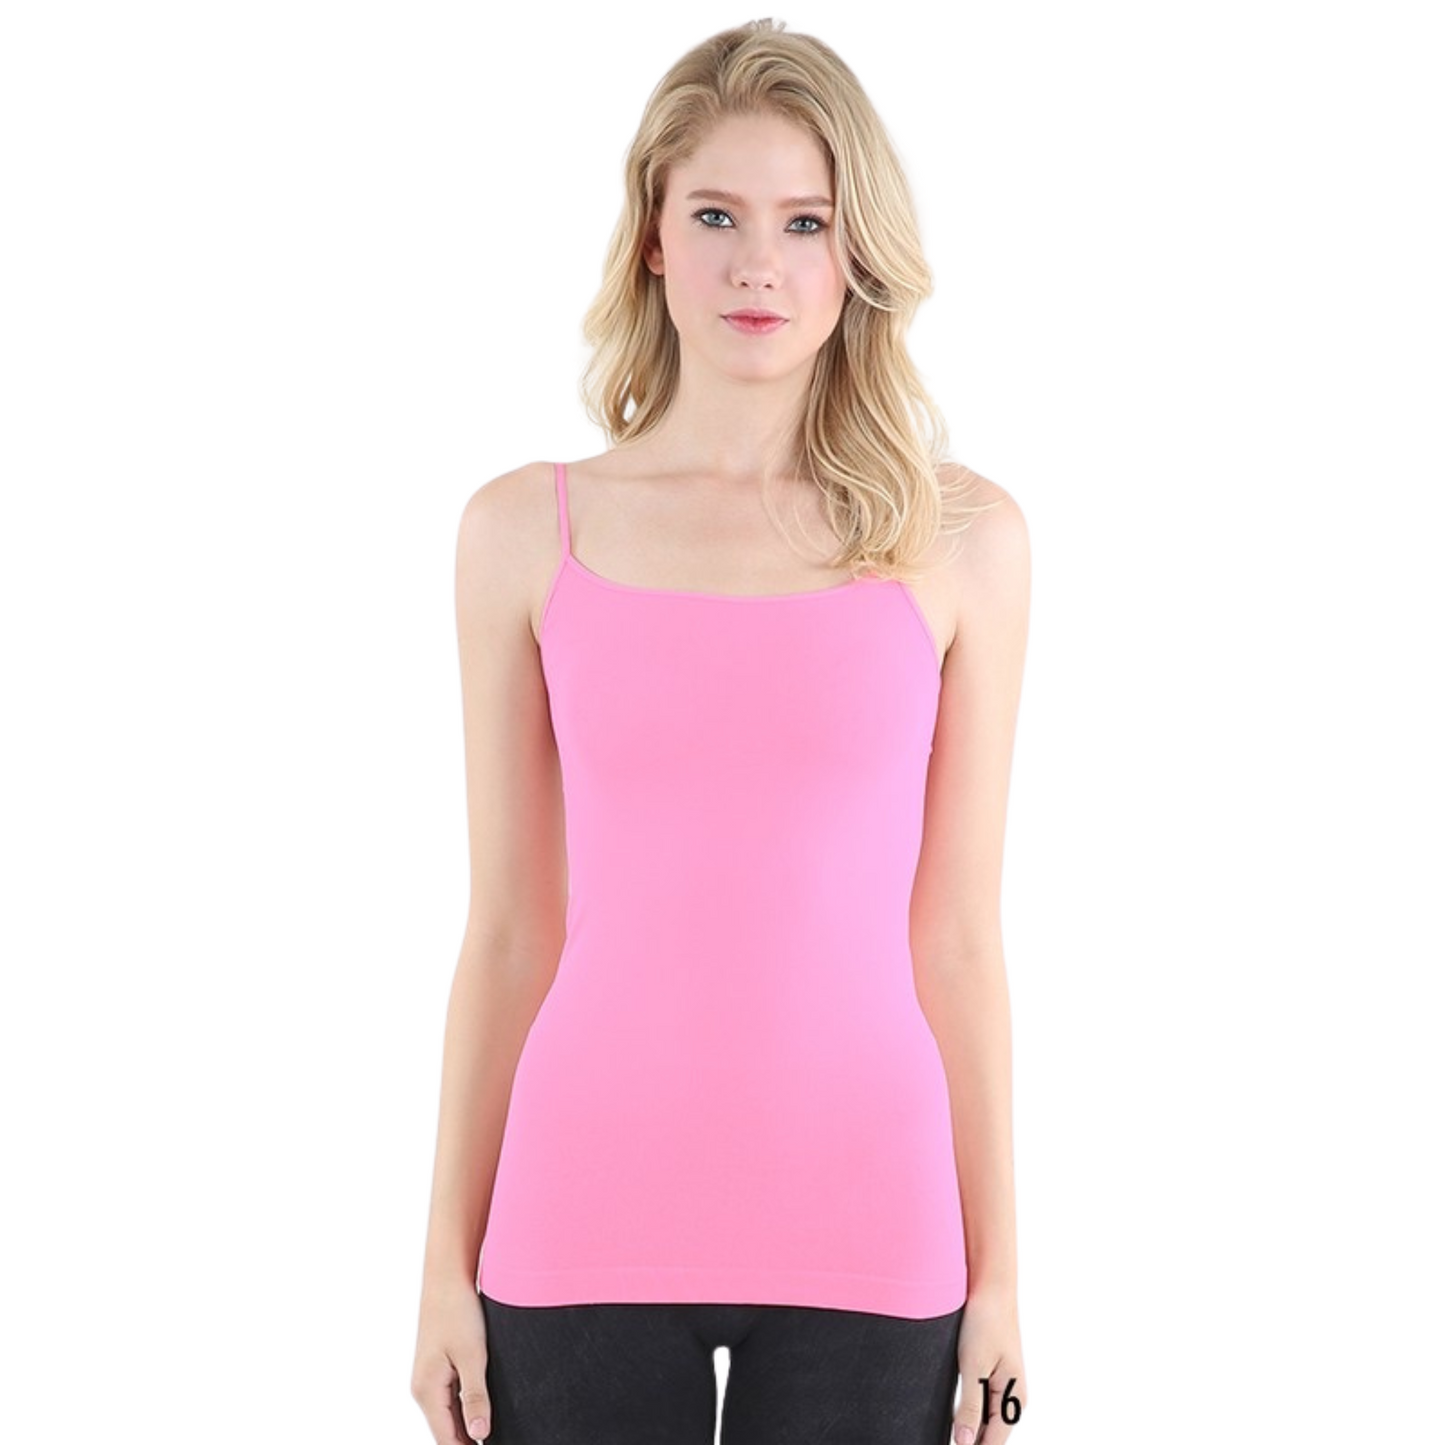 Our Long Camisoles offer you a fashionable silhouette with one size that fits most. Made of butter soft fabric, they come in a variety of colors so you can find one to match any outfit. Enjoy a comfortable, flattering fit that's perfect for any occasion.